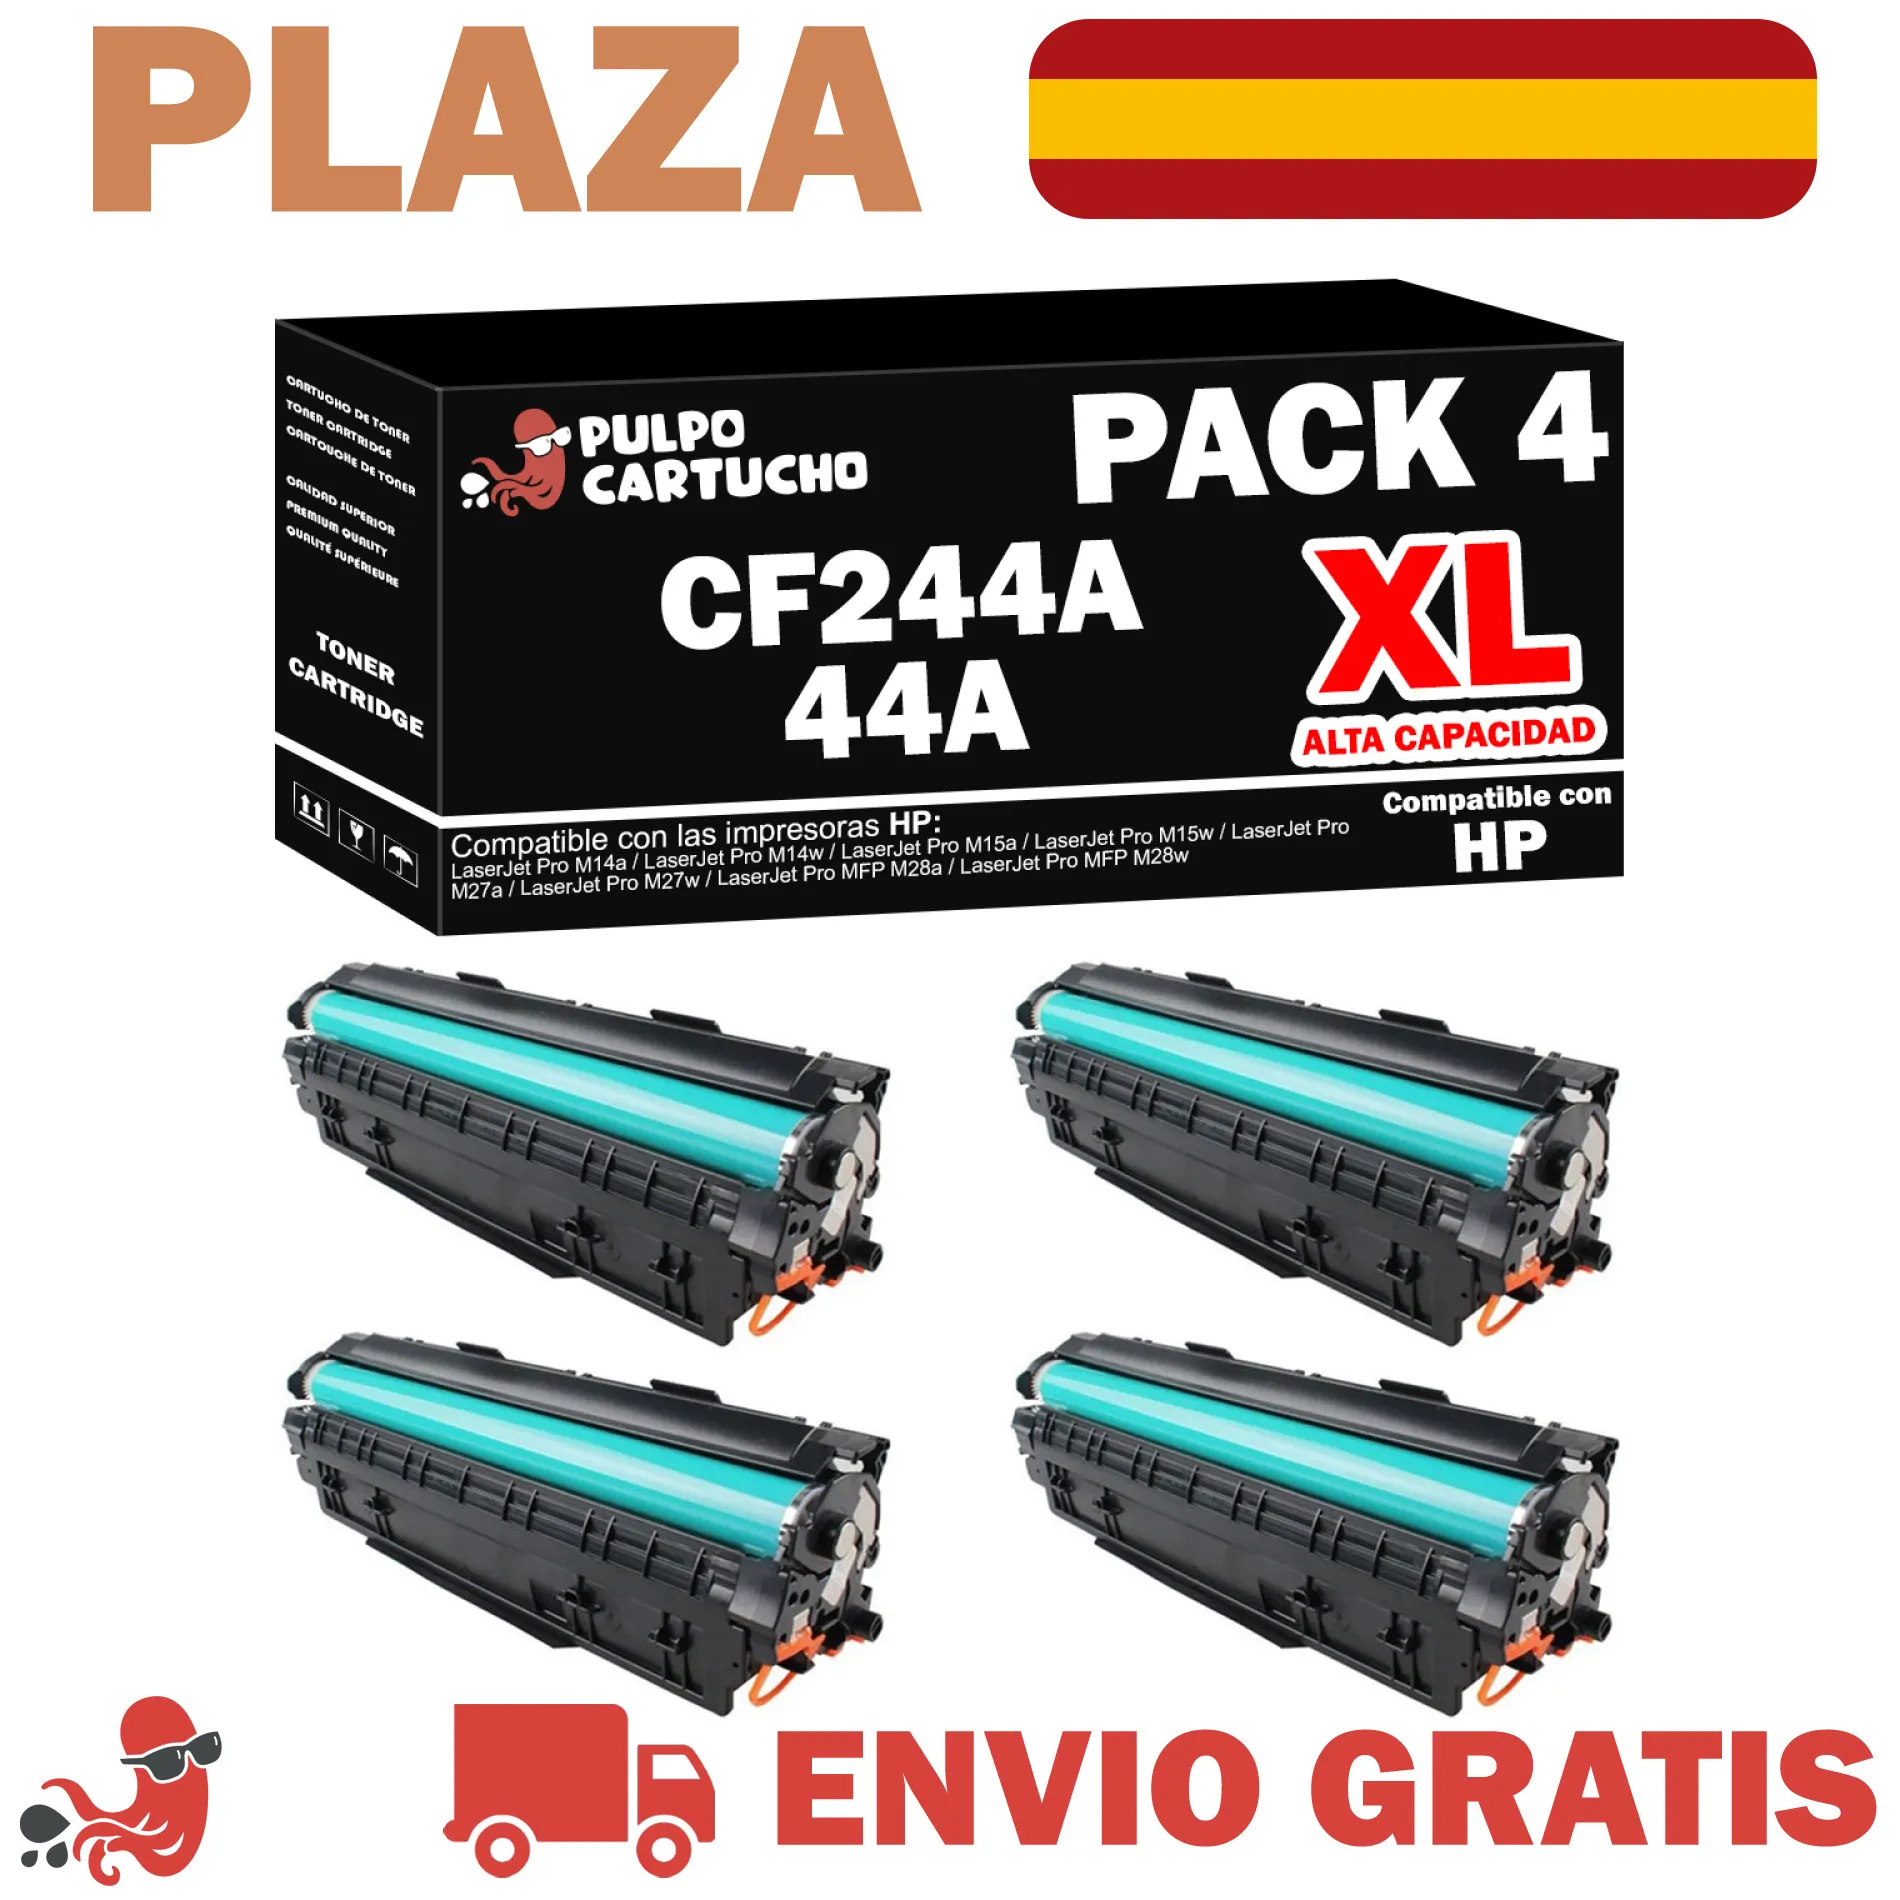 Pack 4 x Toner HP CF244A XL (high capacity) Premium support HP 44A - Non  Oem-LaserJet printer cartridge Pro M14a, M14w, M15a, M15w, M27a, M27w, MFP  M28a, MFP M28w-consumable-capacity 4x2.000 pages -